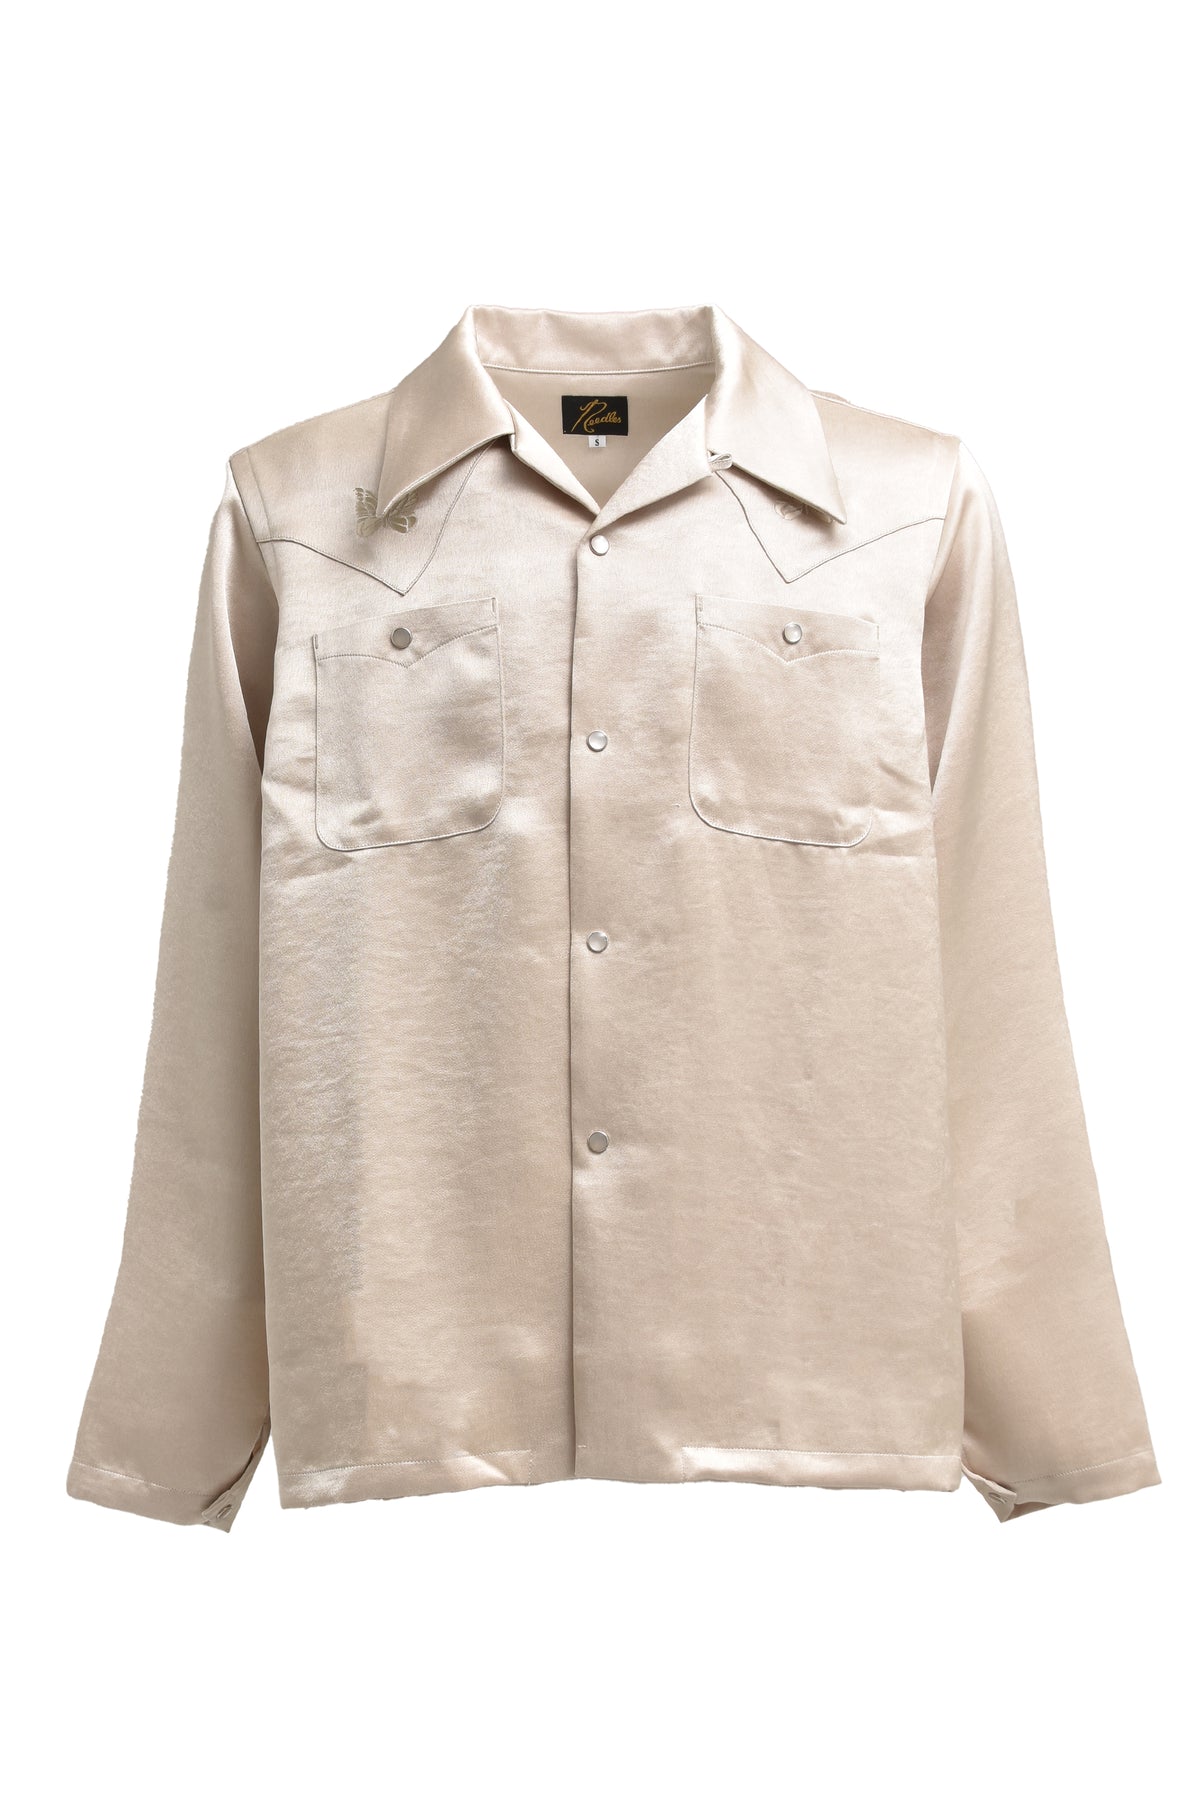 L/S COWBOY ONE-UP SHIRT - POLY SATEEN / BEI